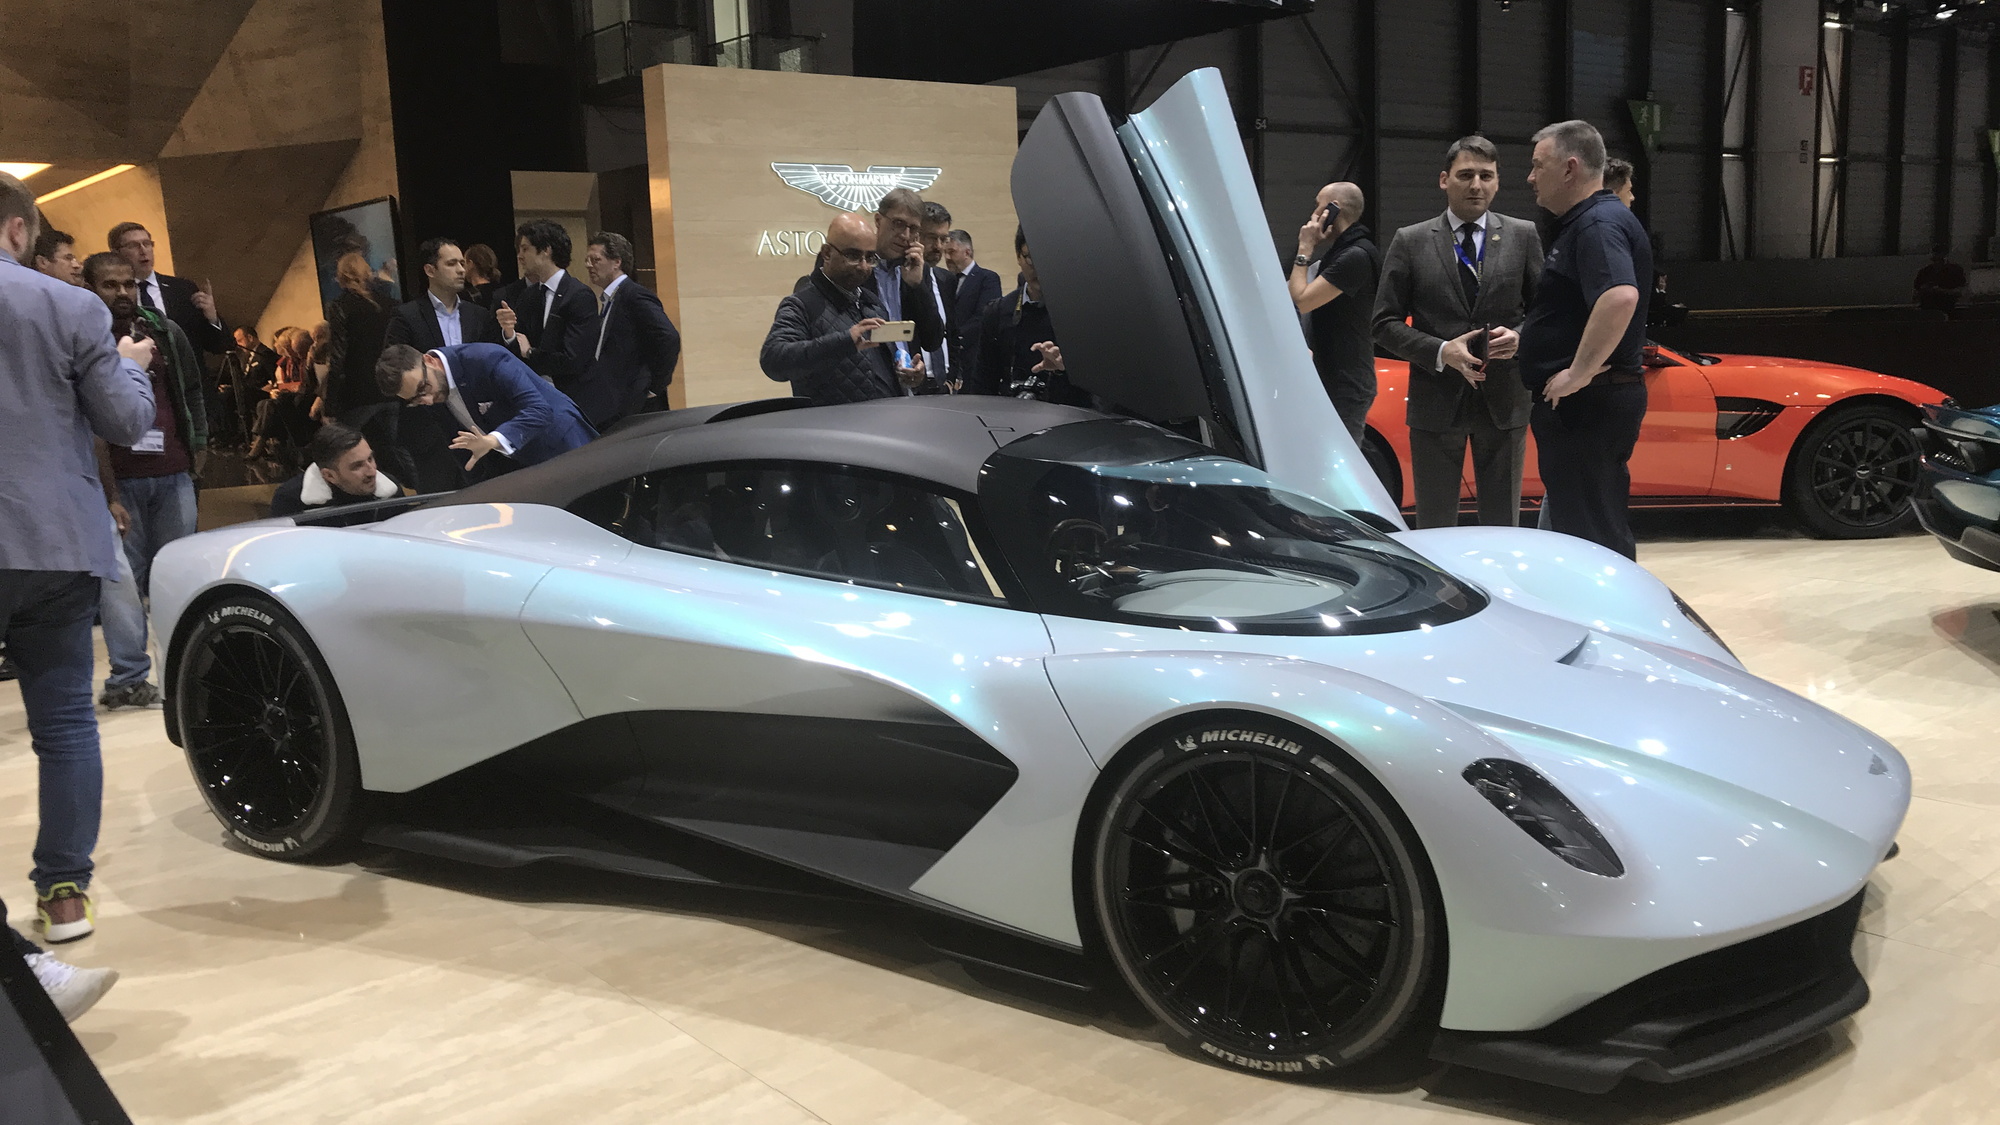 Aston Martin AM-RB 003 Hypercar reportedly to be named as 